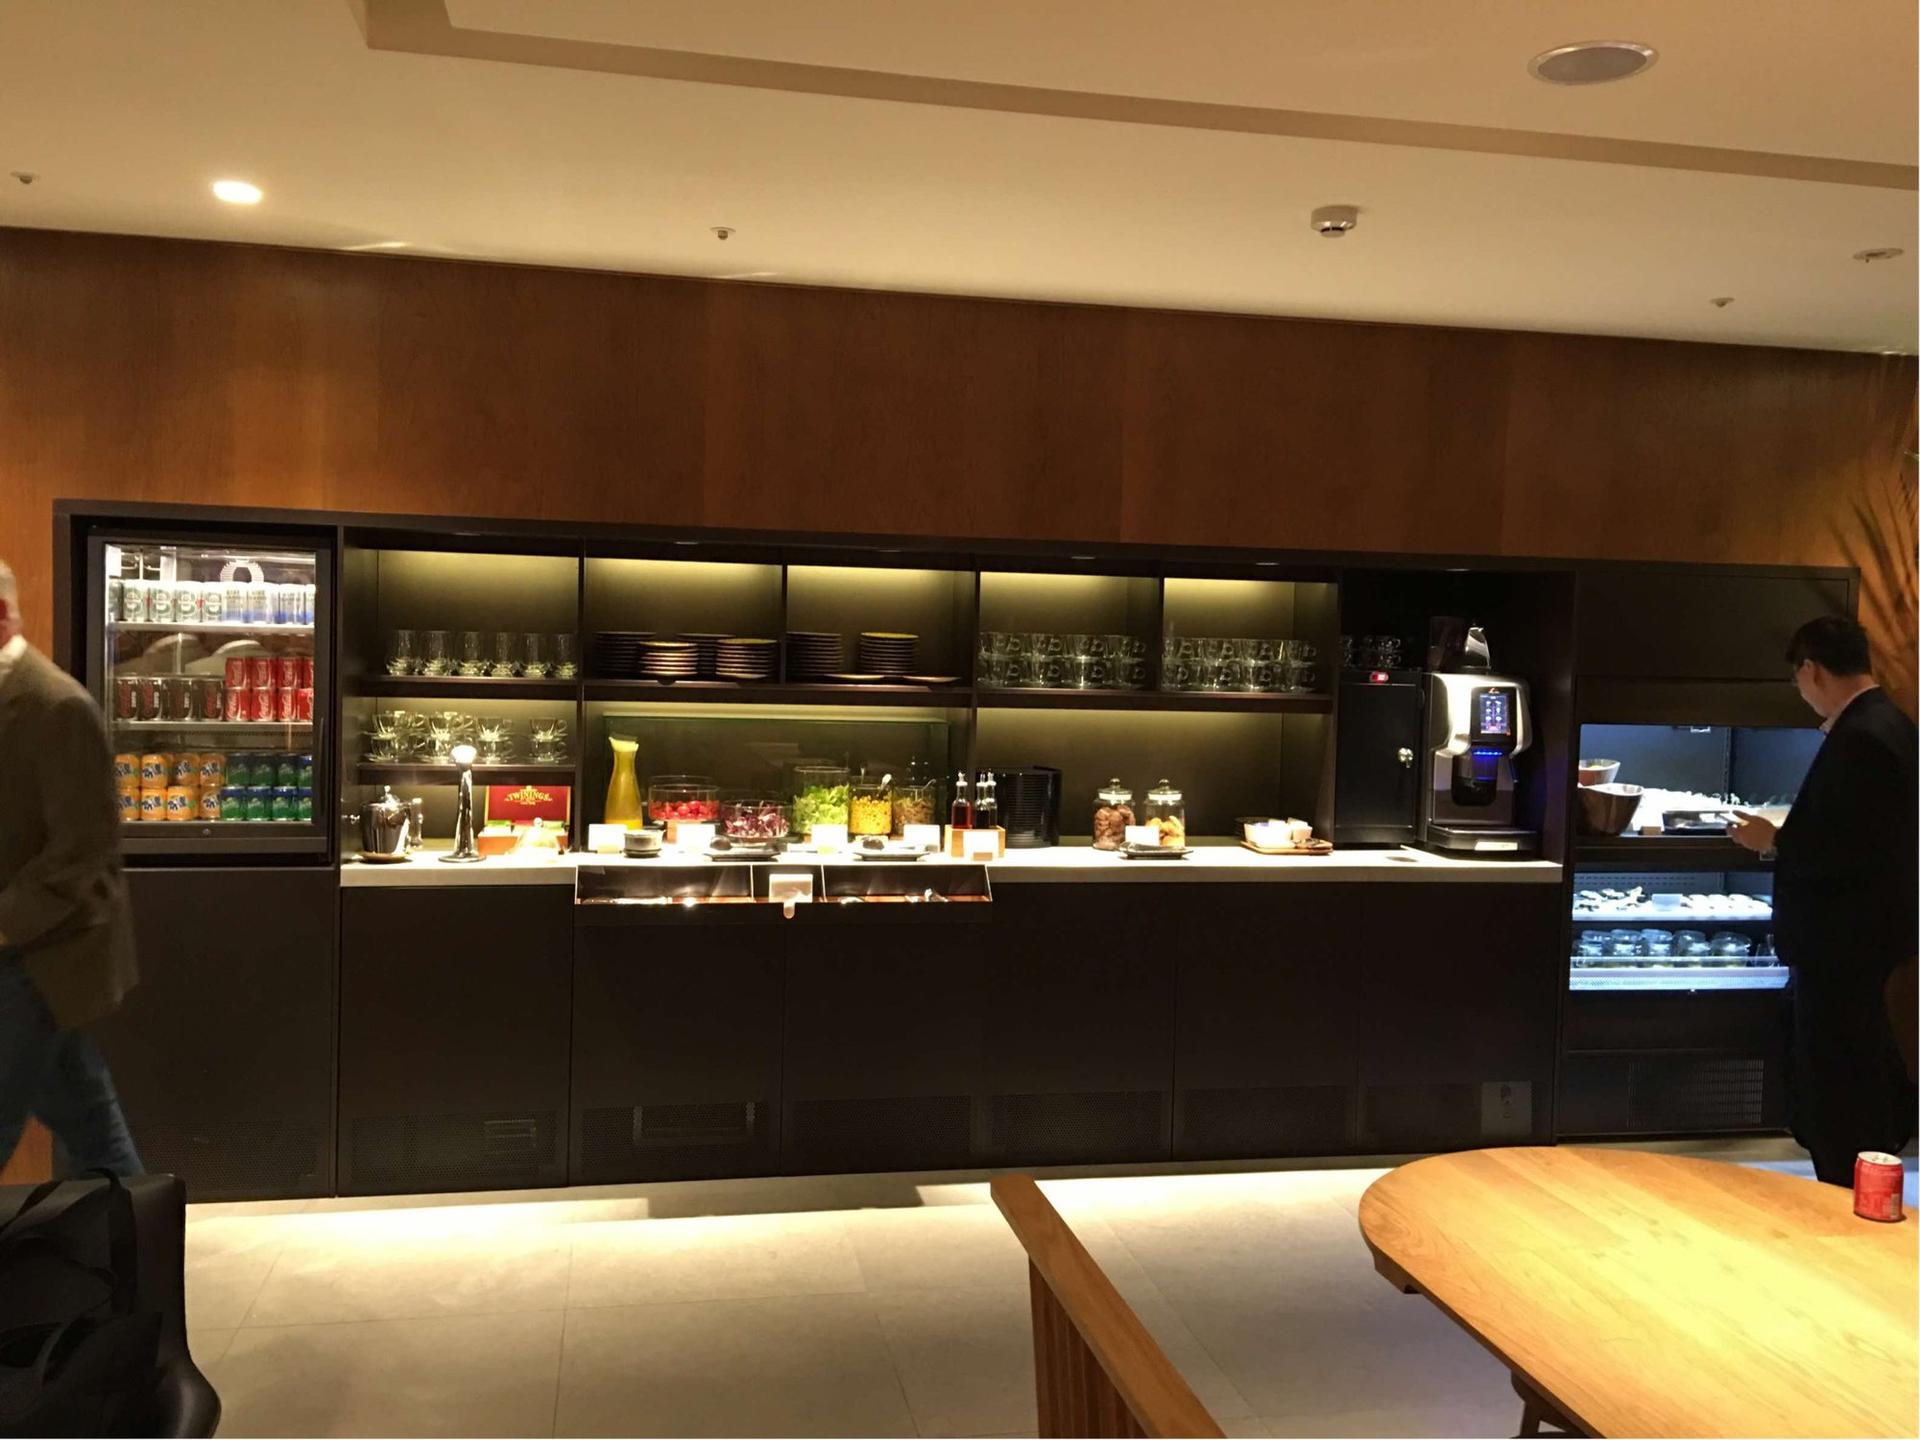 Cathay Pacific Lounge image 7 of 37